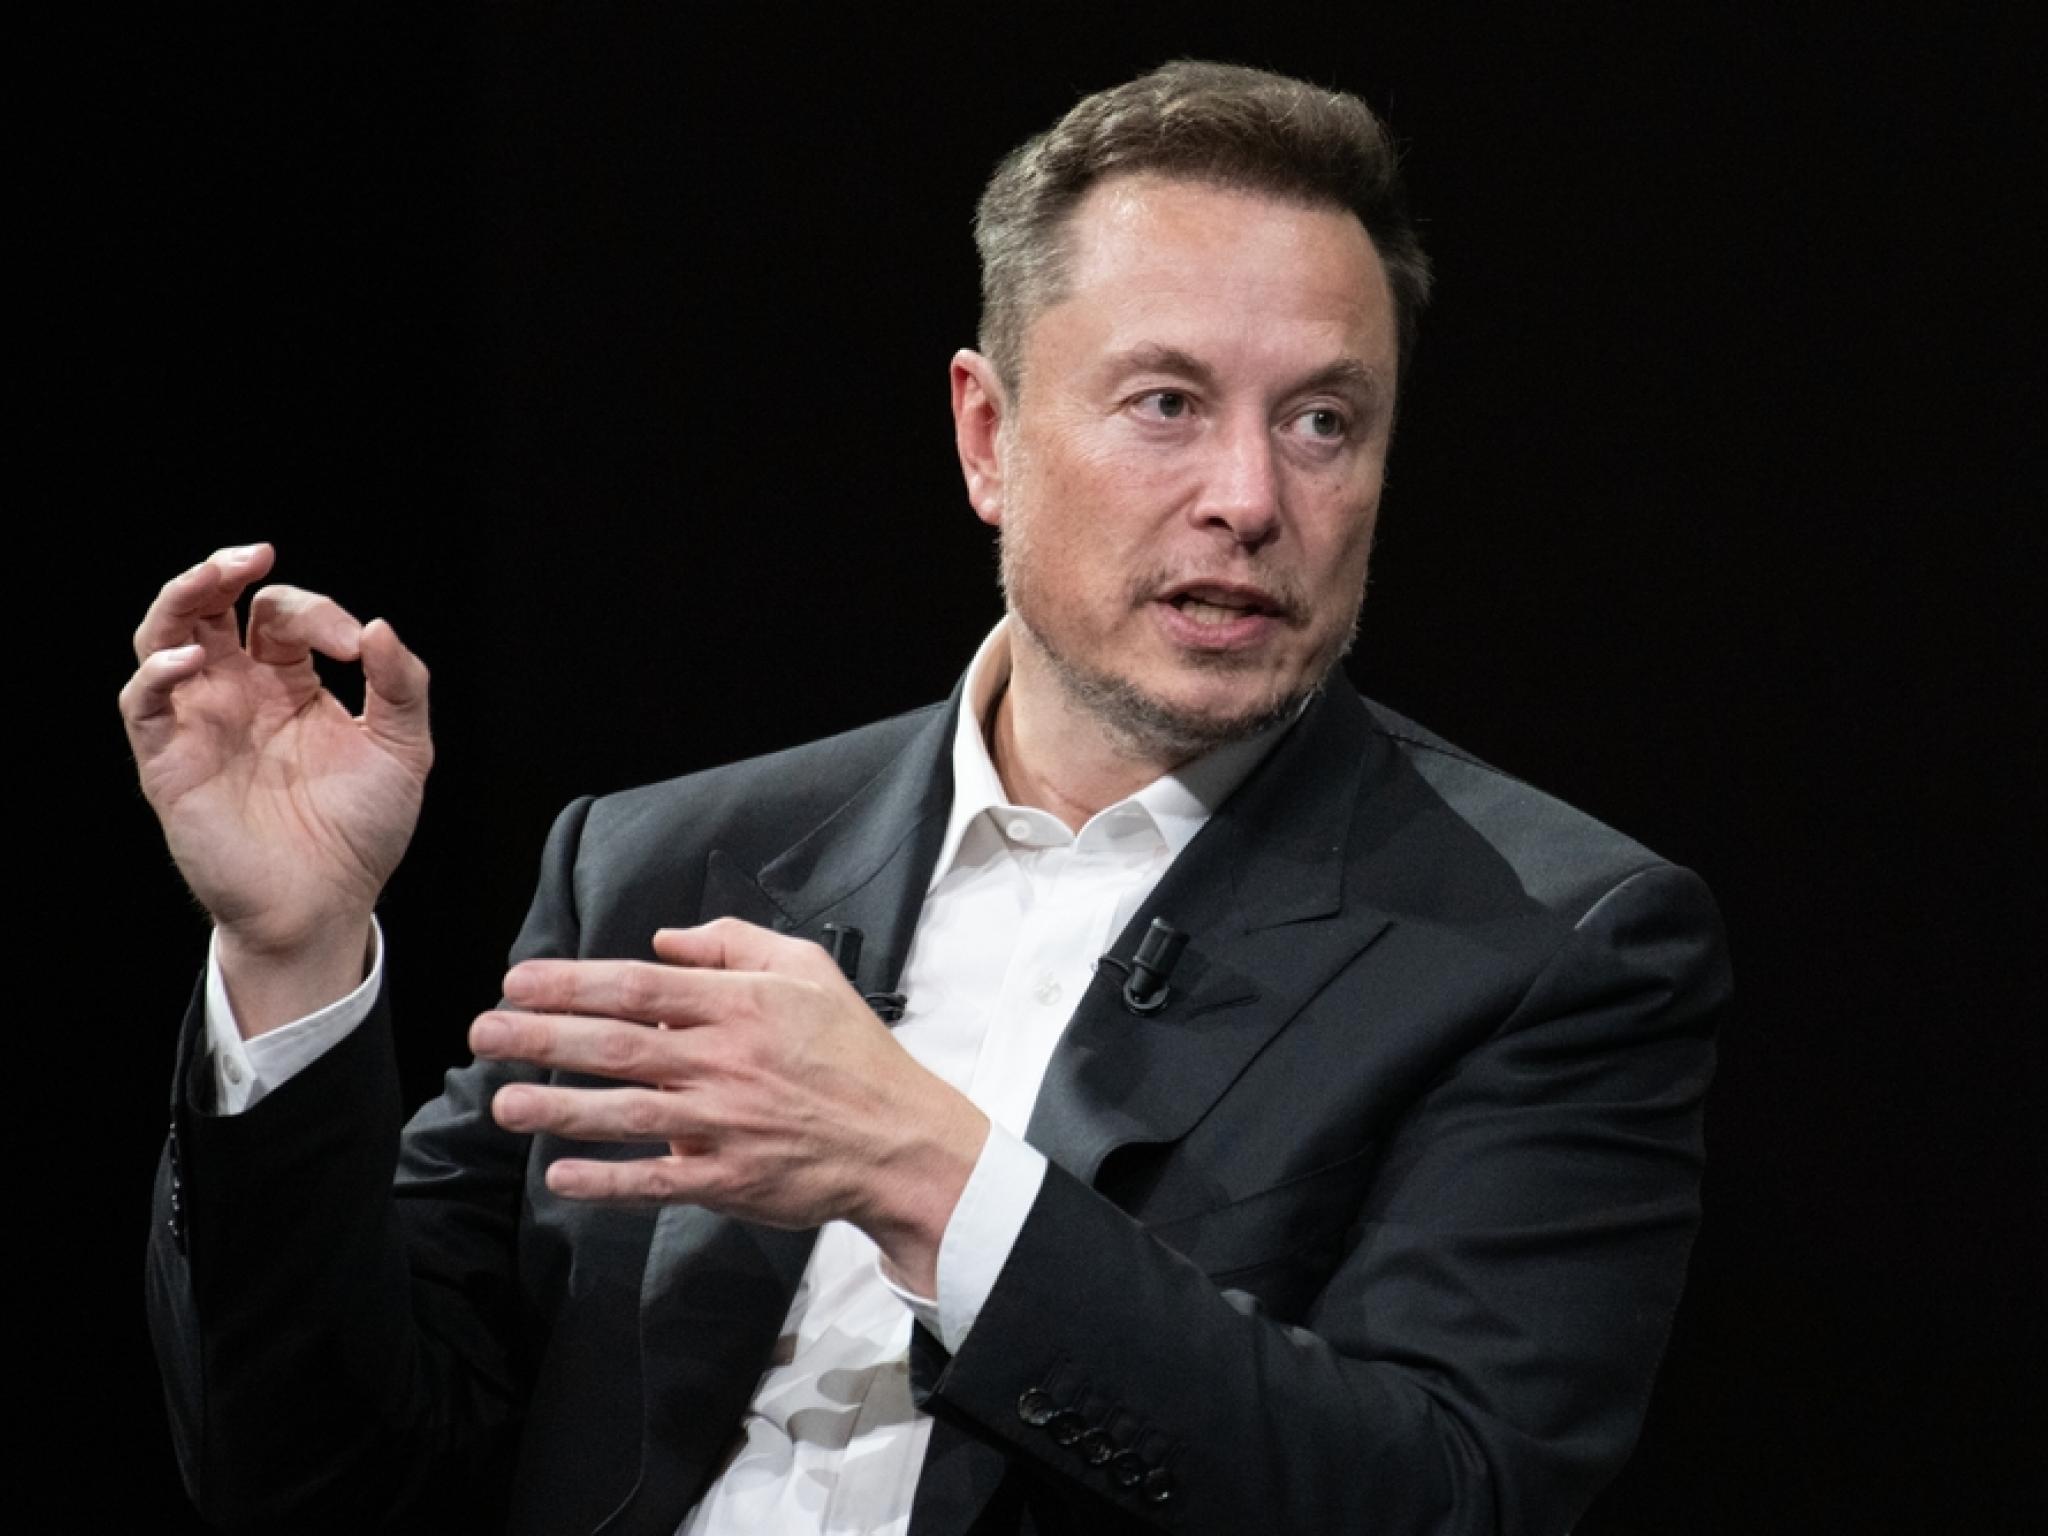  tesla-ceo-elon-musk-draws-parallel-between-netflixs-decision-to-focus-on-streaming-over-renting-dvds-to-ev-maker-doubling-down-on-vehicle-autonomy 